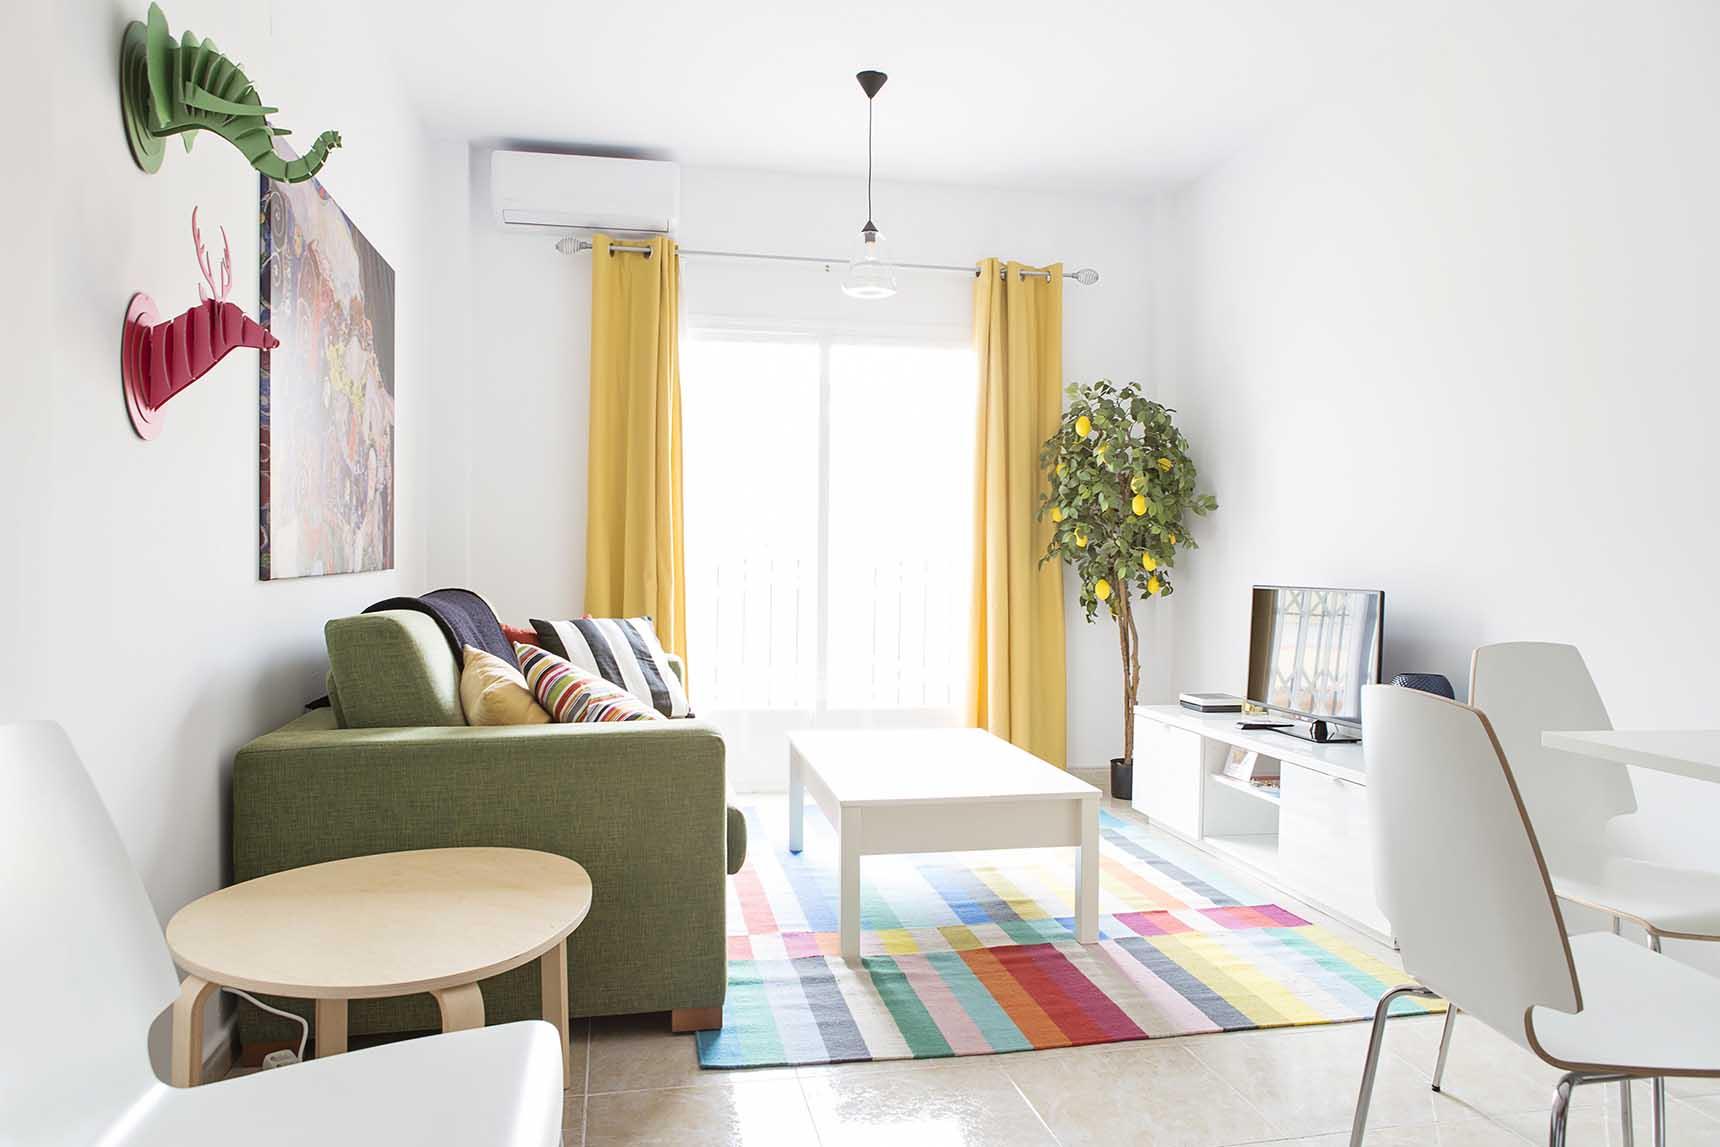 Aceite - Renovated Apartment in Malaga